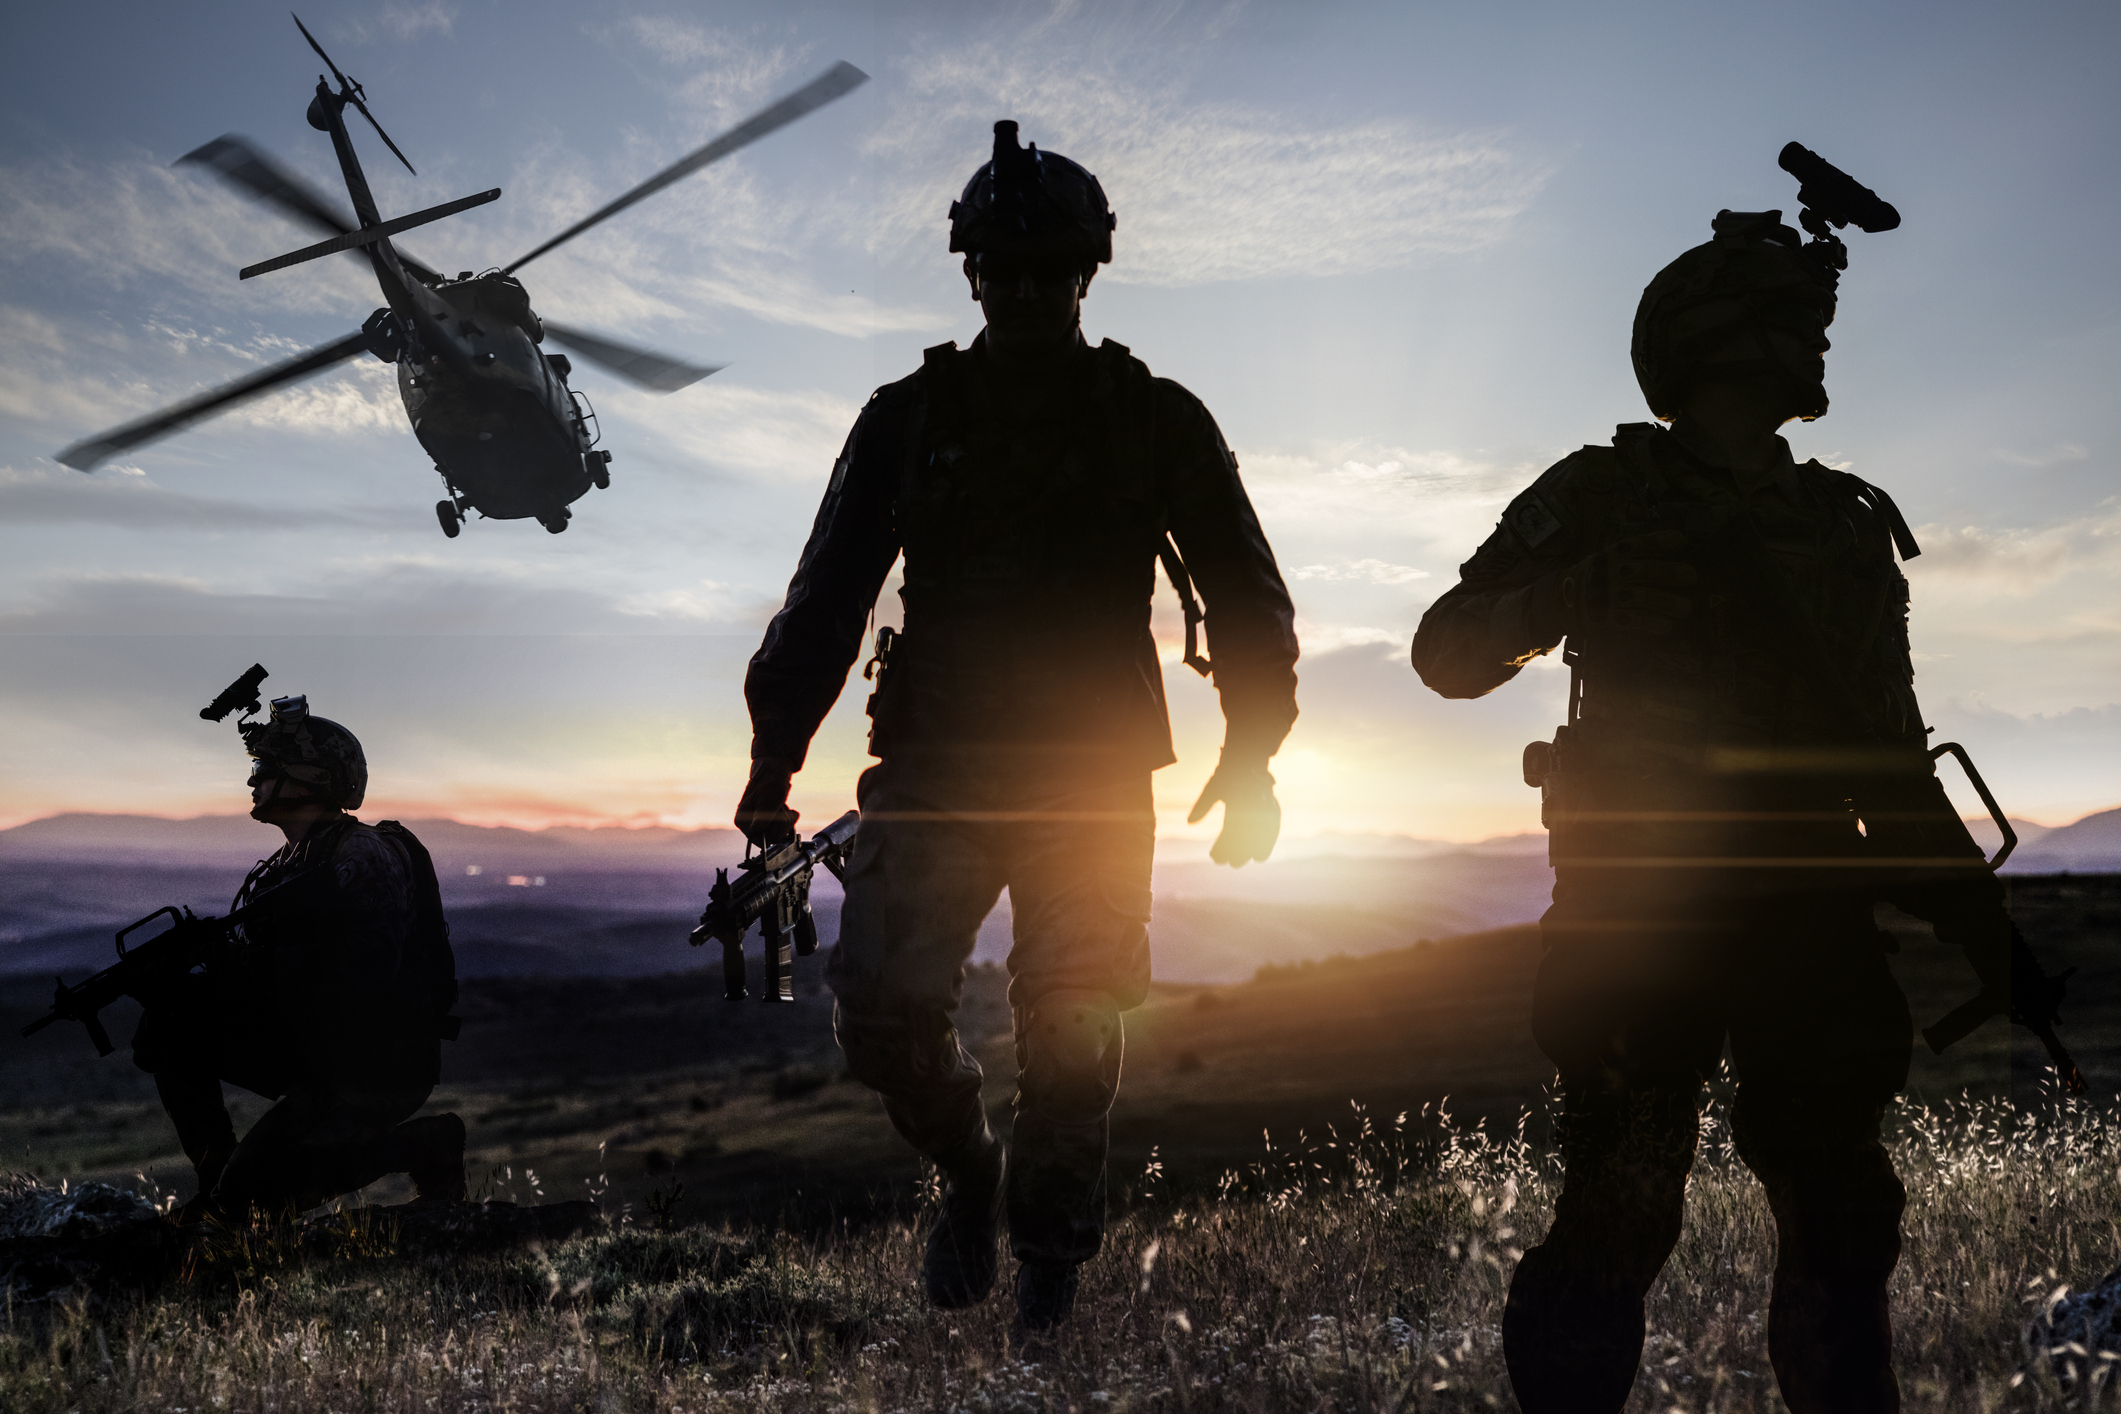 Silhouettes of soldiers during Military Mission  at Sunset